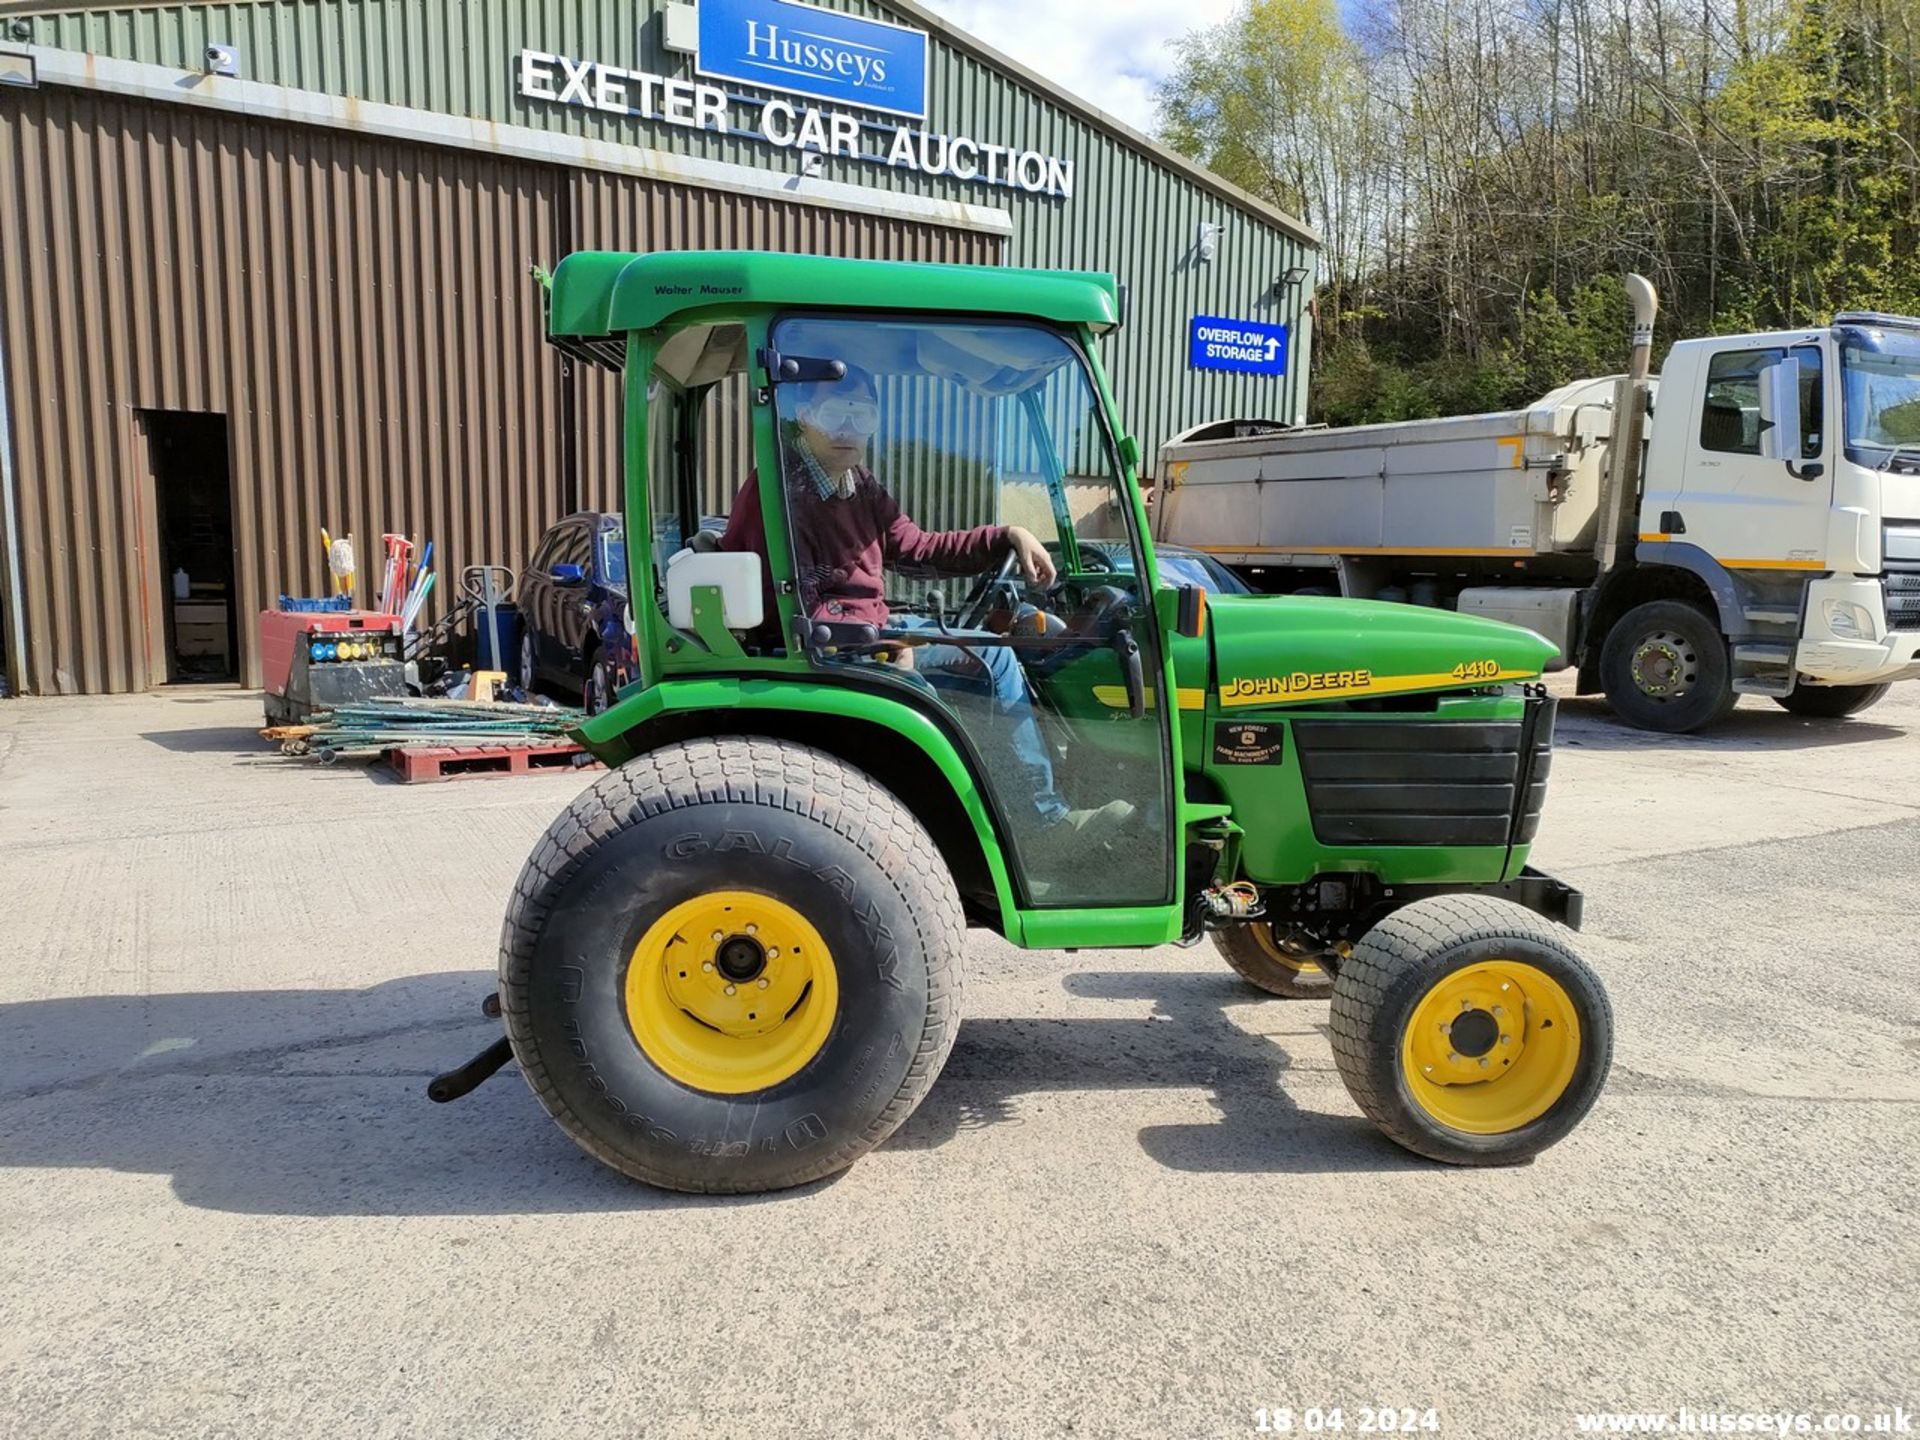 JOHN DEERE 4410 35HP TRACTOR 5410HRS SHUTTLE BRAKES NEED ATTENTION, NO FRONT WNDSCREEN - Image 8 of 18